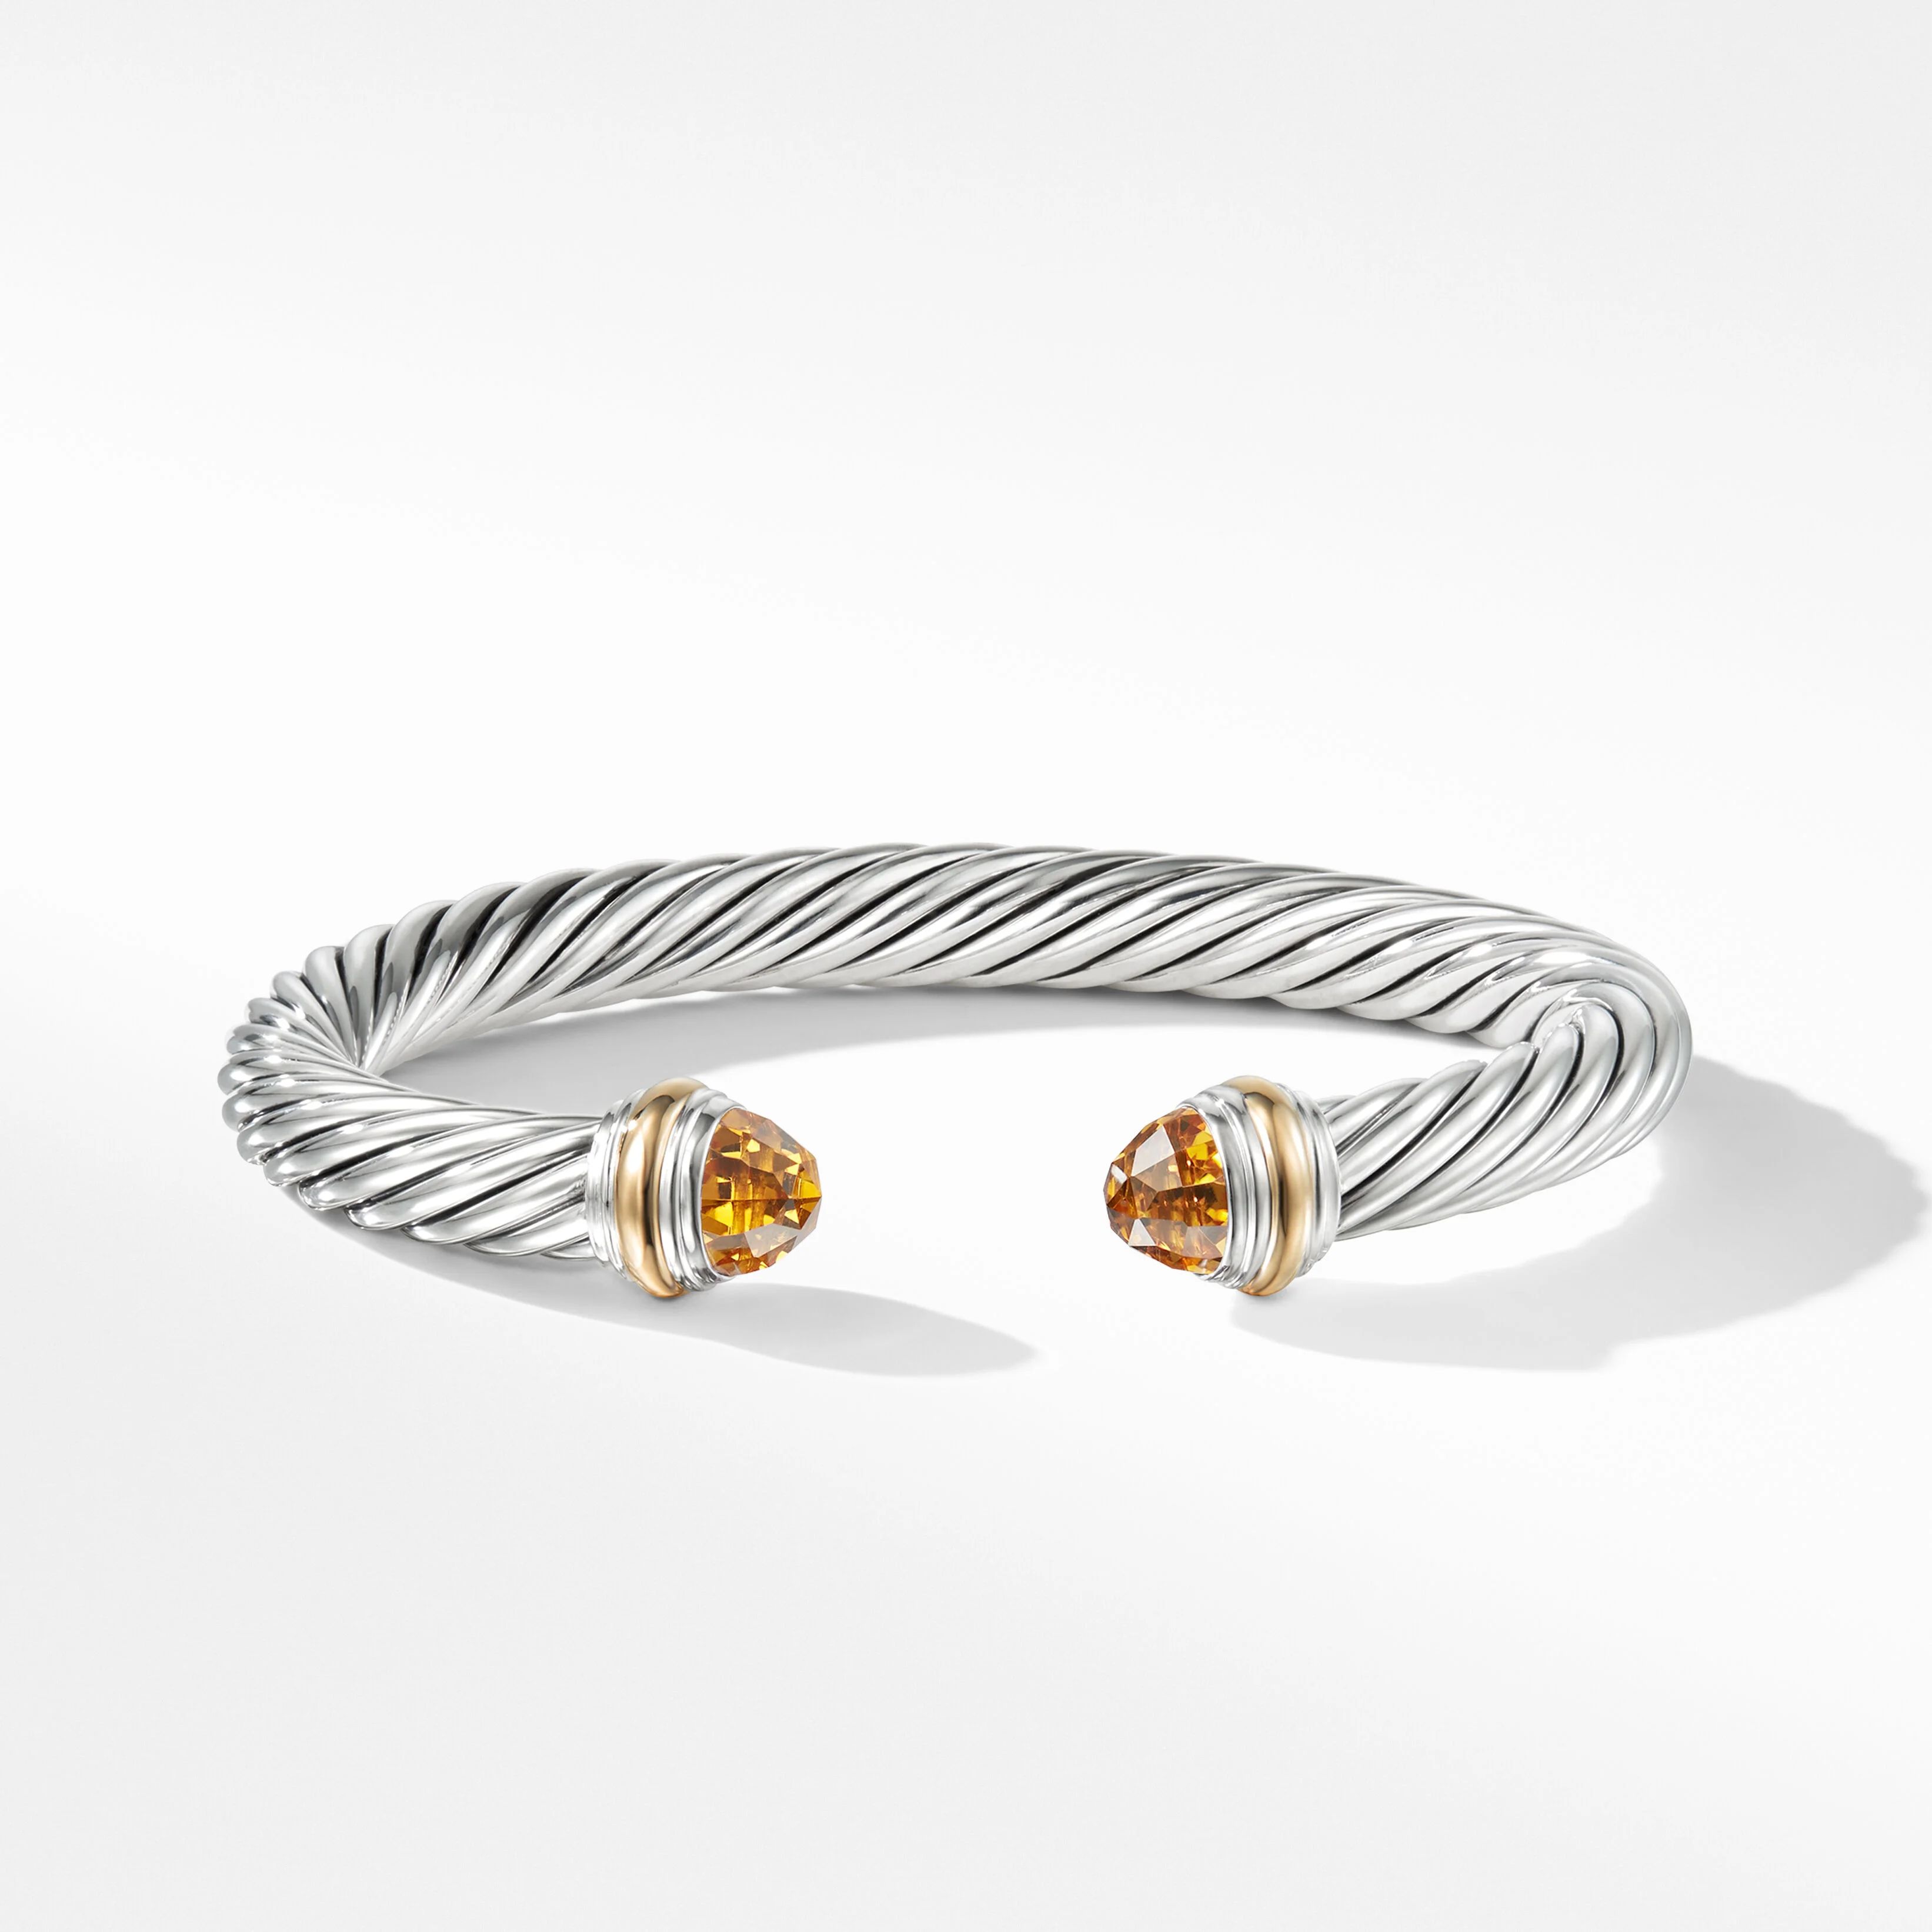 Cable Classics Bracelet in Sterling Silver with Citrine and 14K Yellow Gold | David Yurman